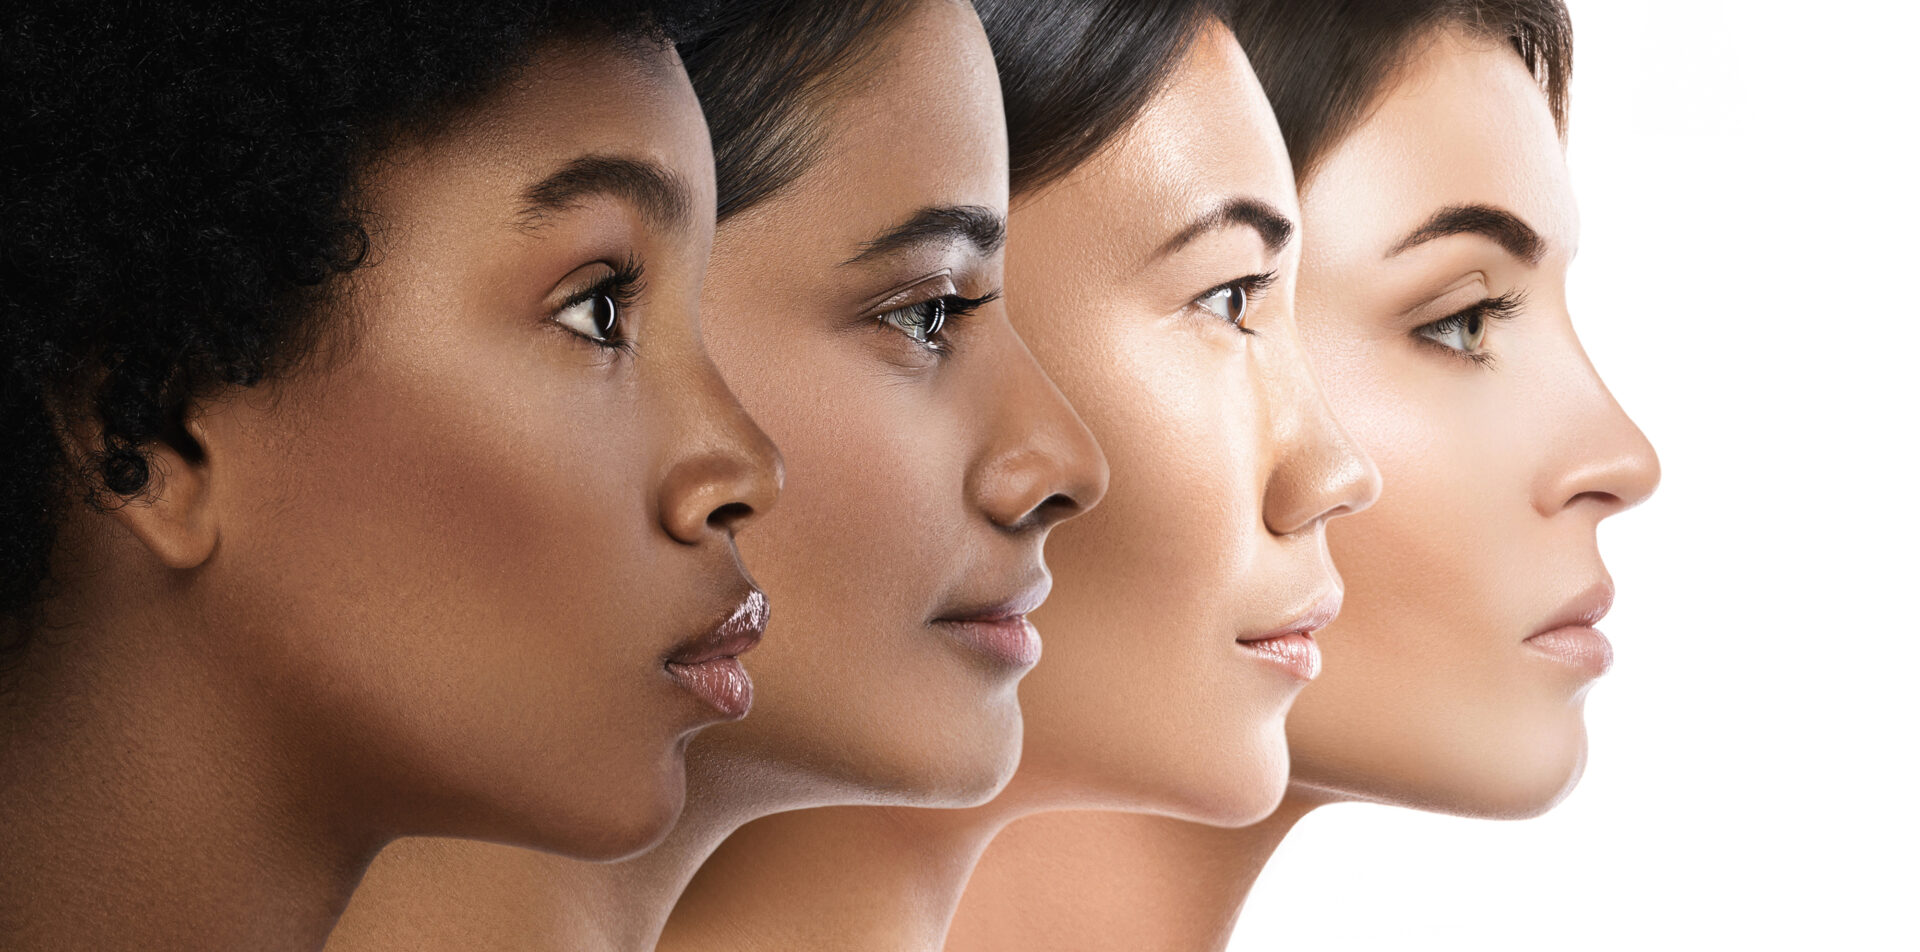 A series of women 's faces showing different skin tones.